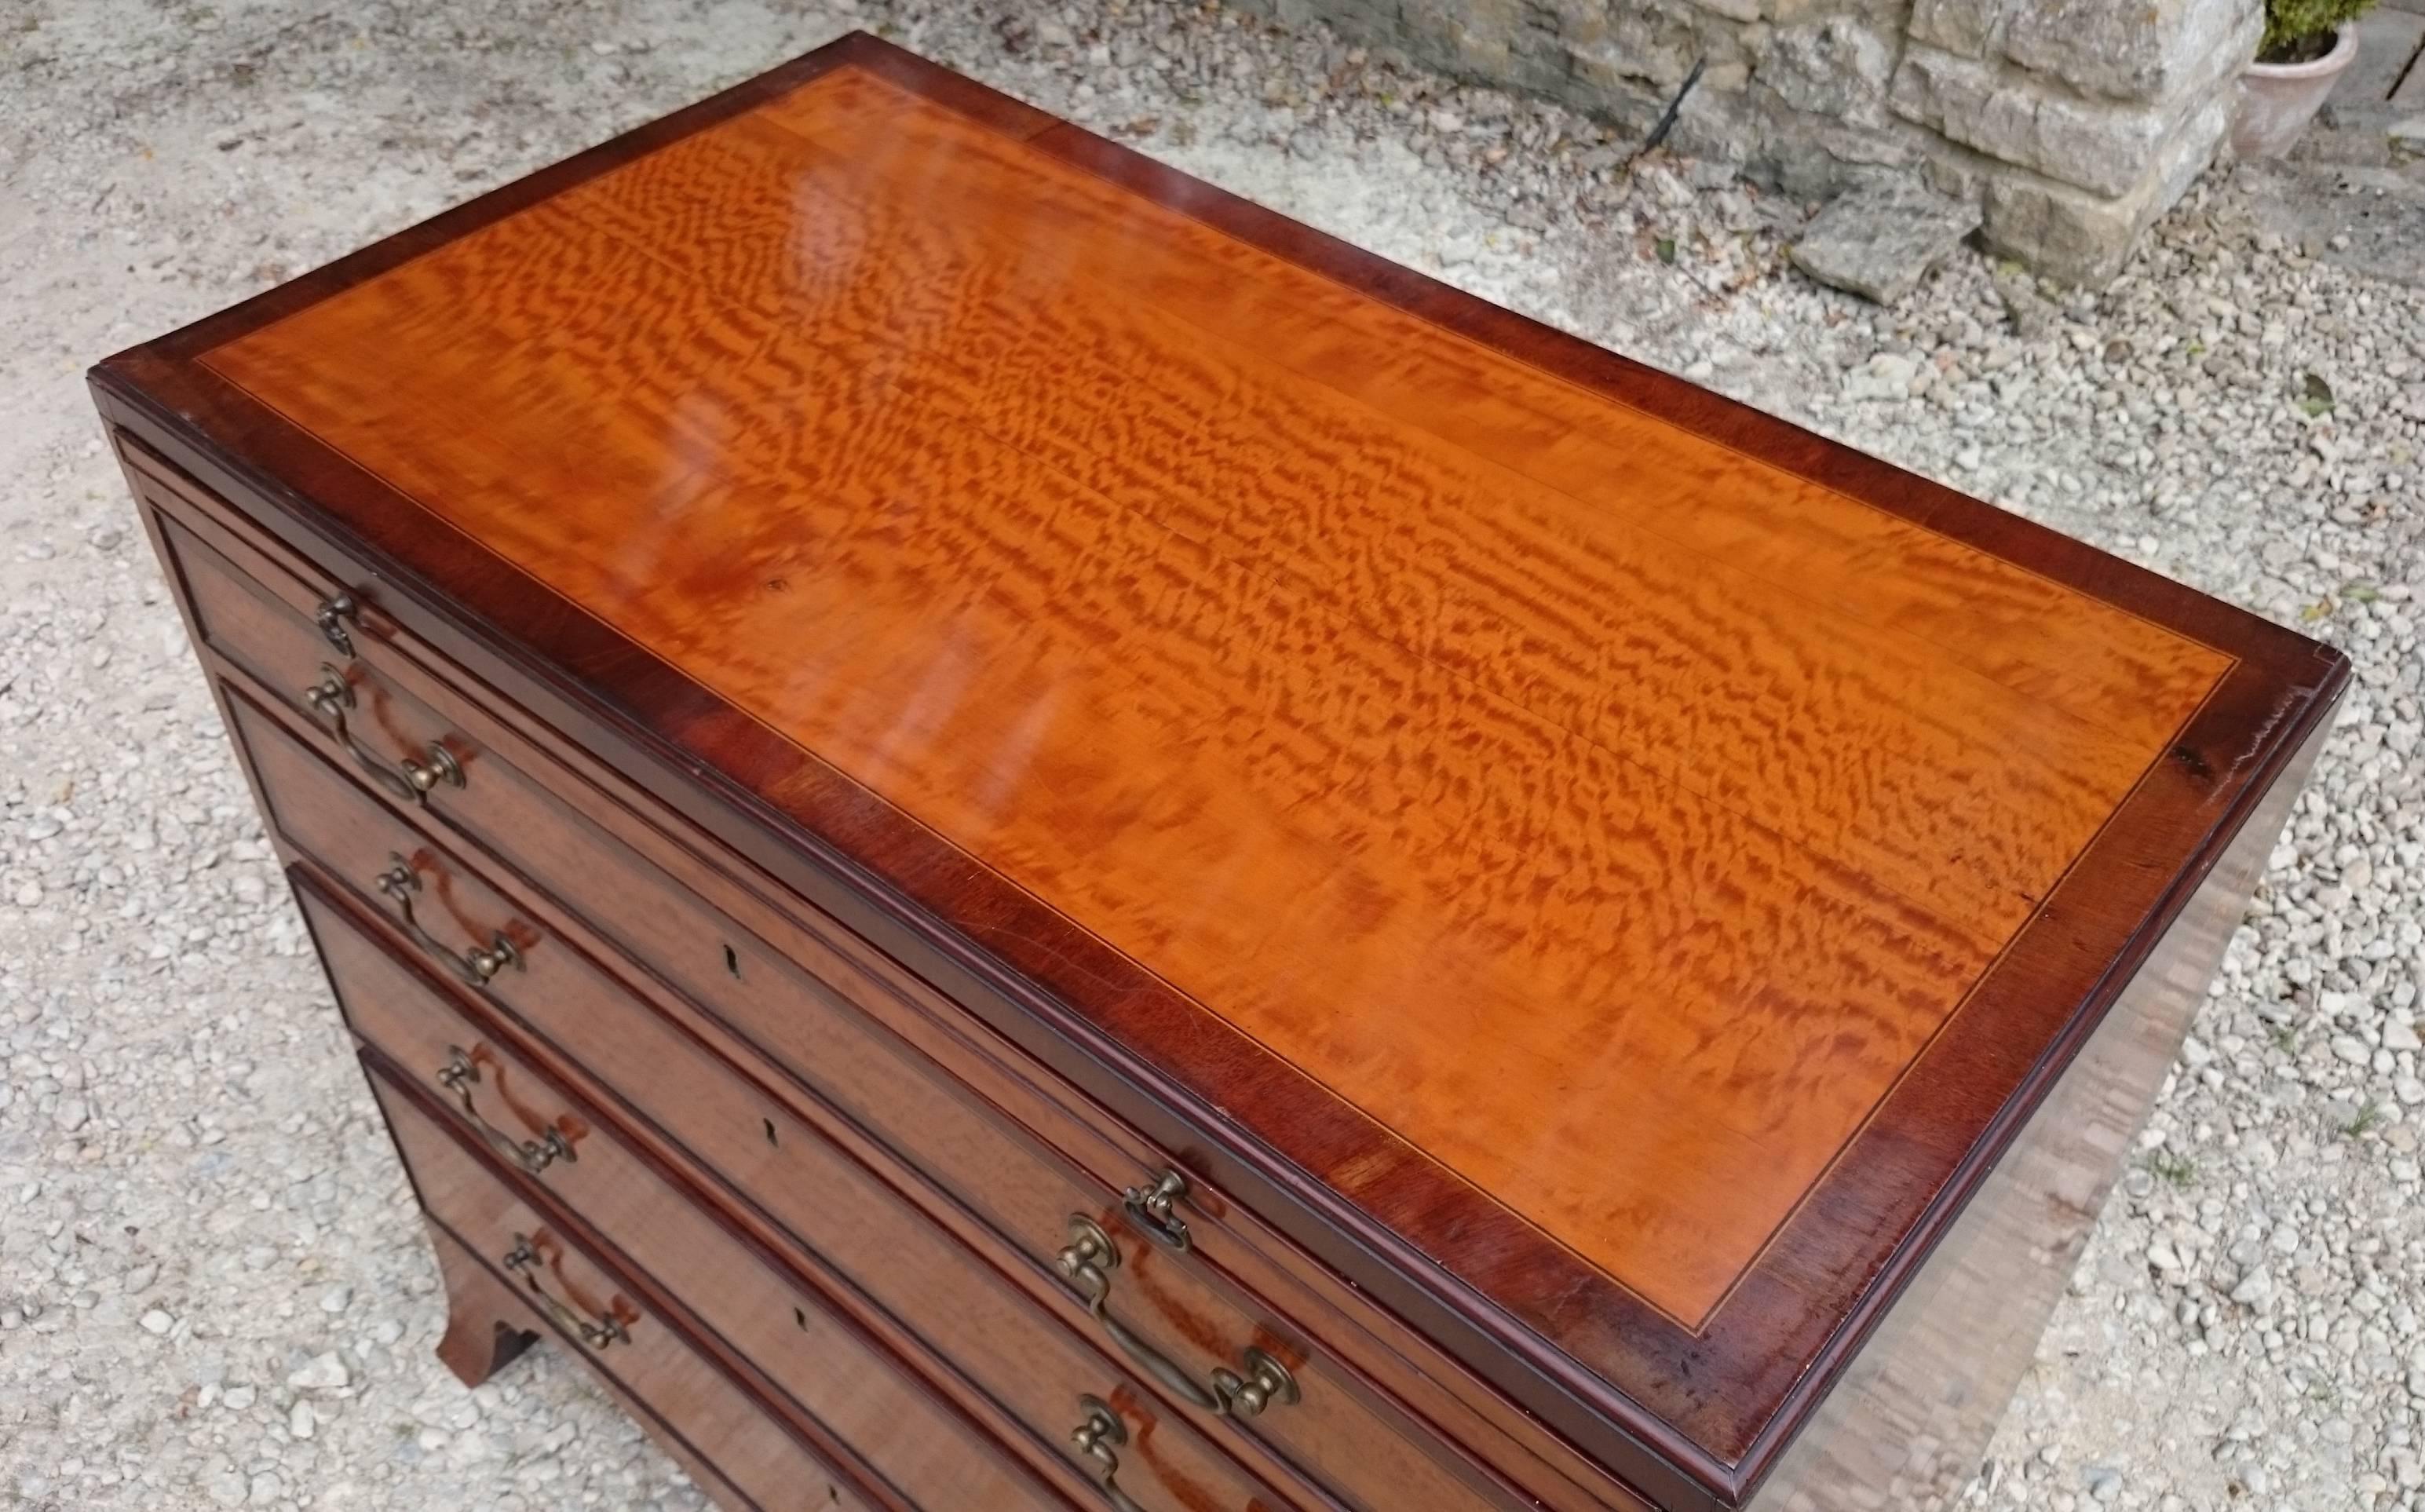 Most excellent chest of drawers made of amazing 3D satin wood with mahogany crossbanding to contrast the colour. It has oak lined drawers, a brushing slide, bracket feet AND a caddy top! Everything you could ask for in a 220 year old chest of